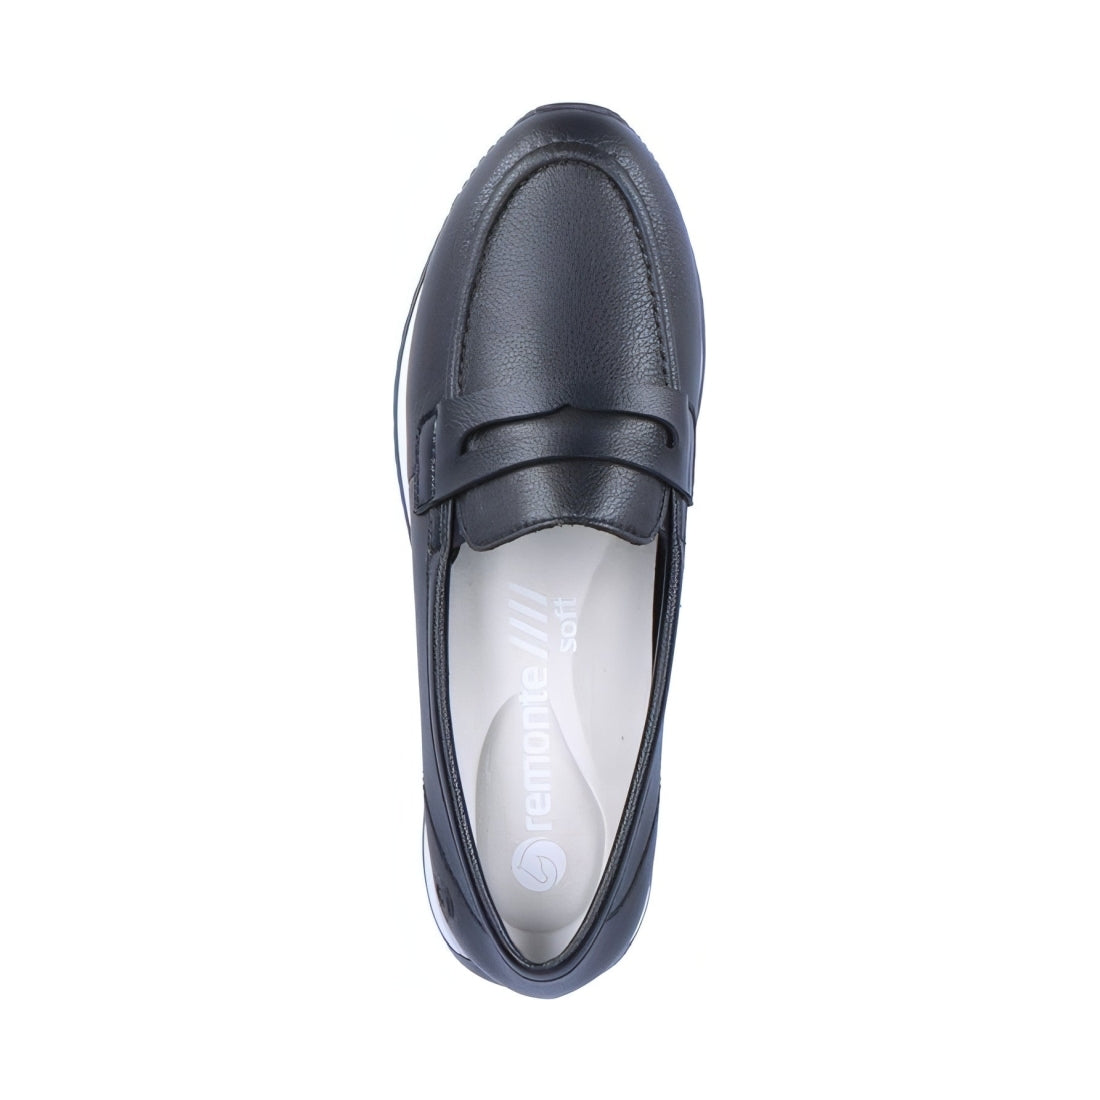 Remonte womens black casual closed loafers | Vilbury London